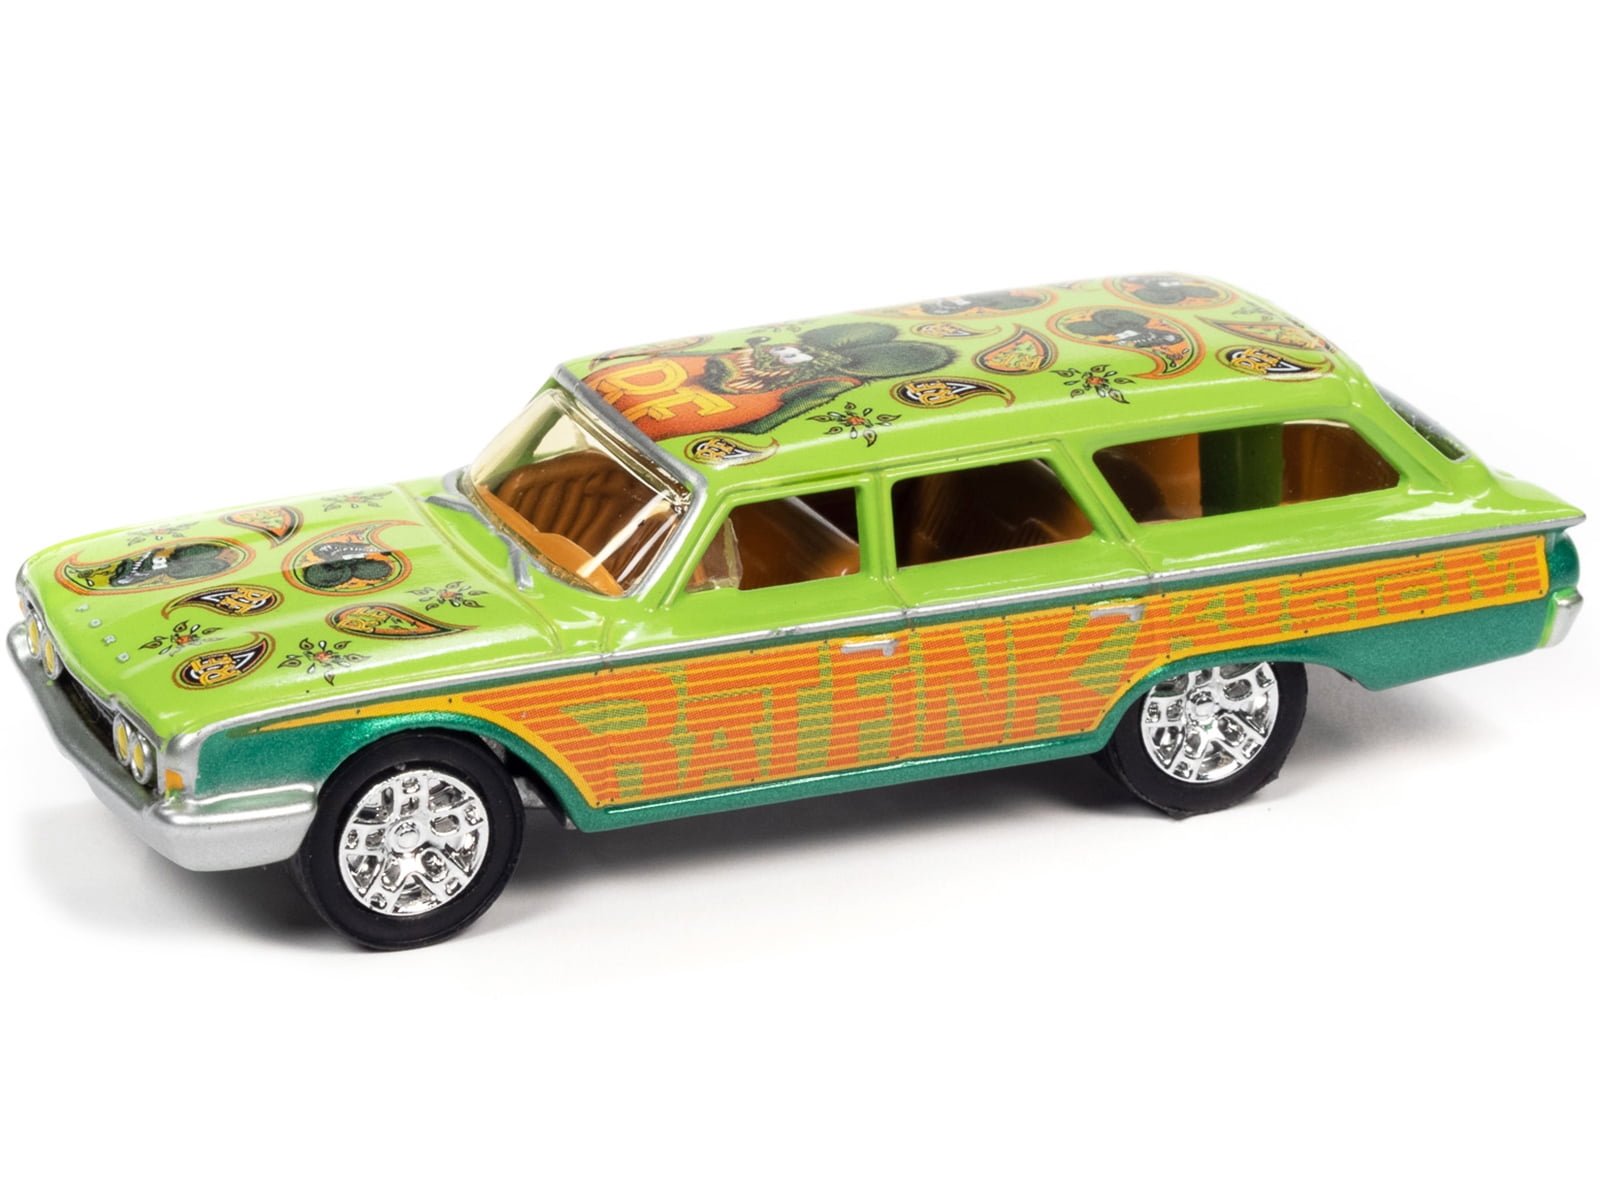 1960 60 FORD COUNTRY SQUIRE STATION WAGON RAT FINK 1:64 SCALE DIECAST MODEL CAR